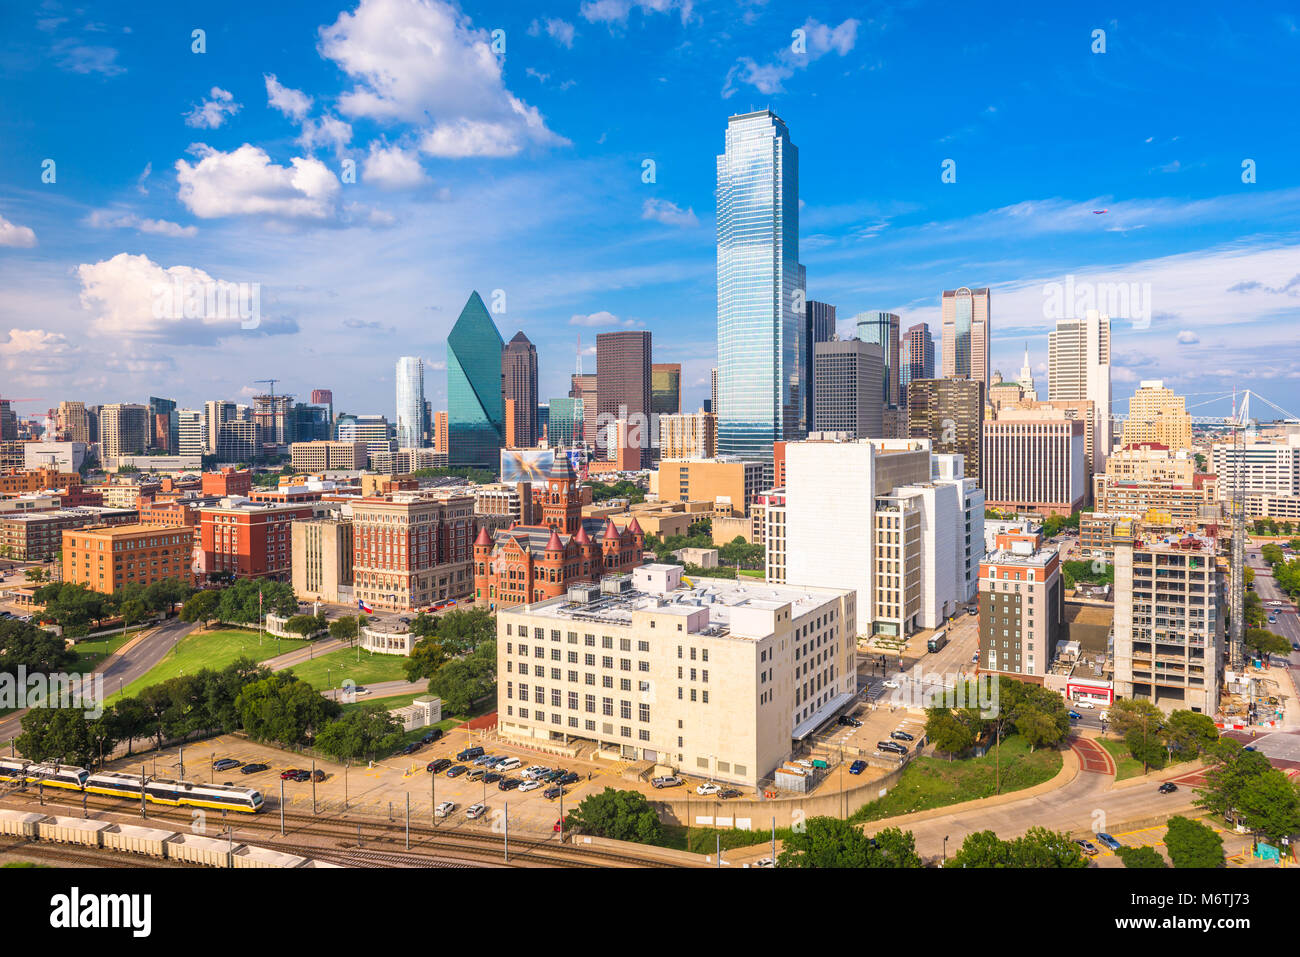 Dallas, Texas, USA skyline from above at dusk. Stock Photo